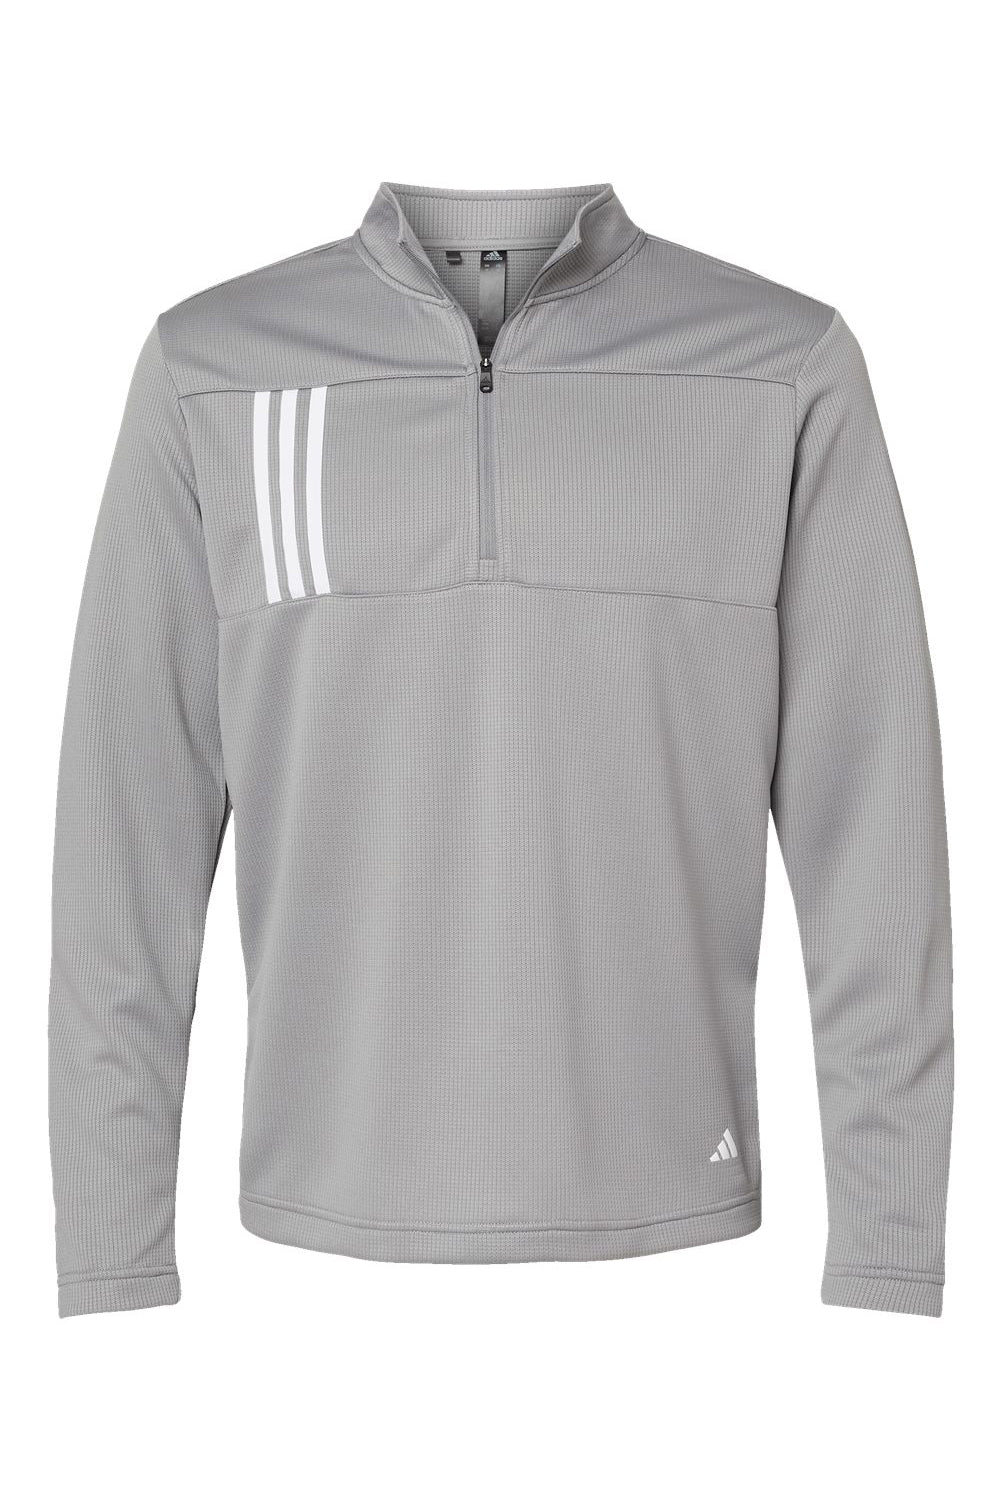 Adidas A482 Mens 3 Stripes Double Knit 1/4 Zip Pullover Grey/White Flat Front